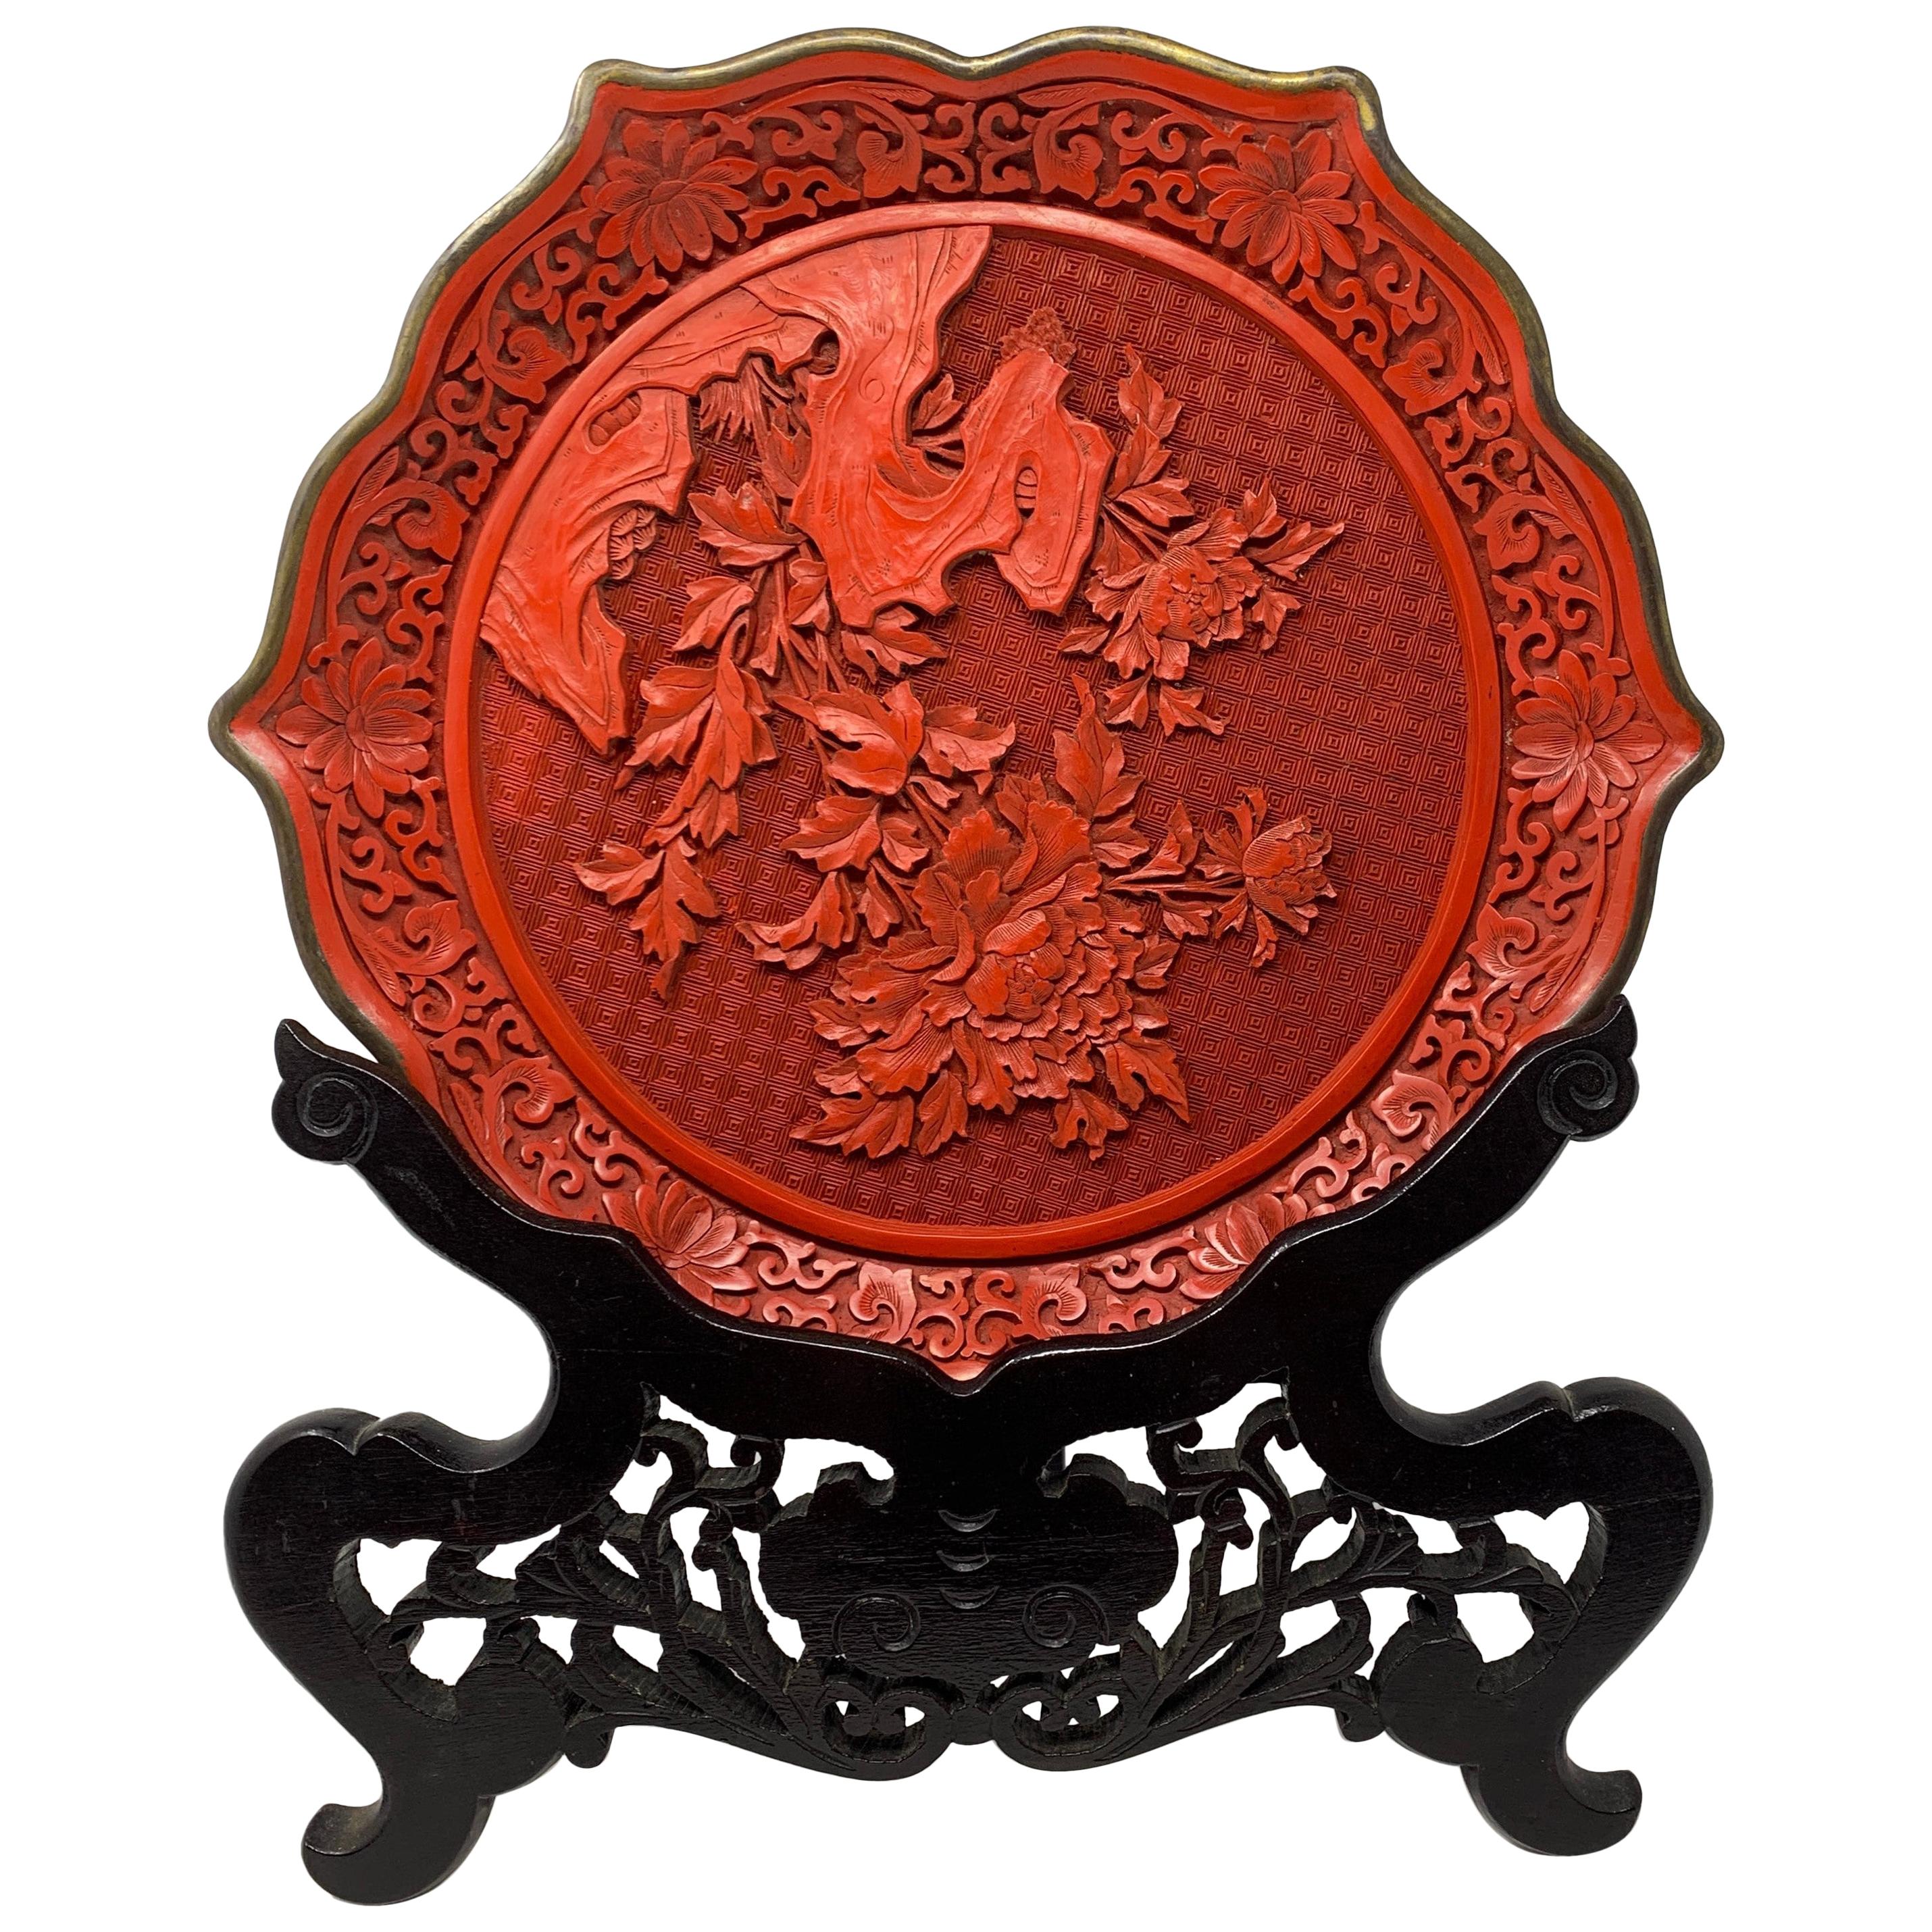 Antique Chinese Cinnabar Rare Red Lacquer Carved in Relief, circa 1890-1910